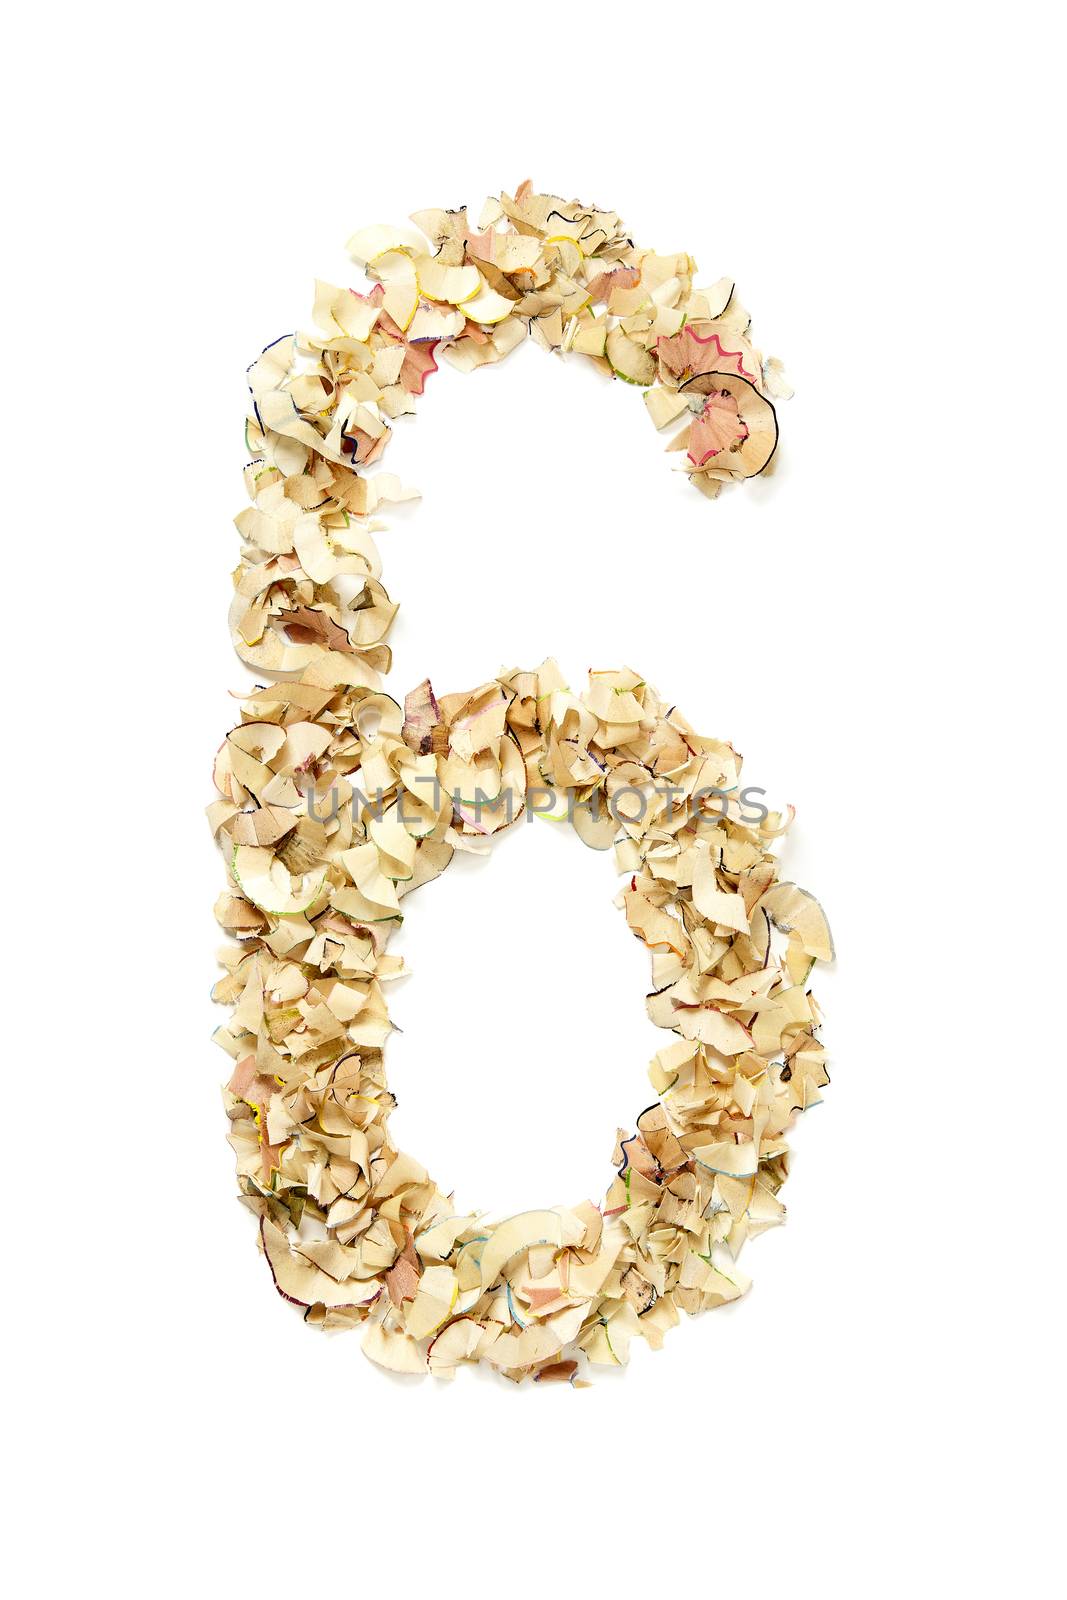 Number 6 made of pencil shavings by filipw